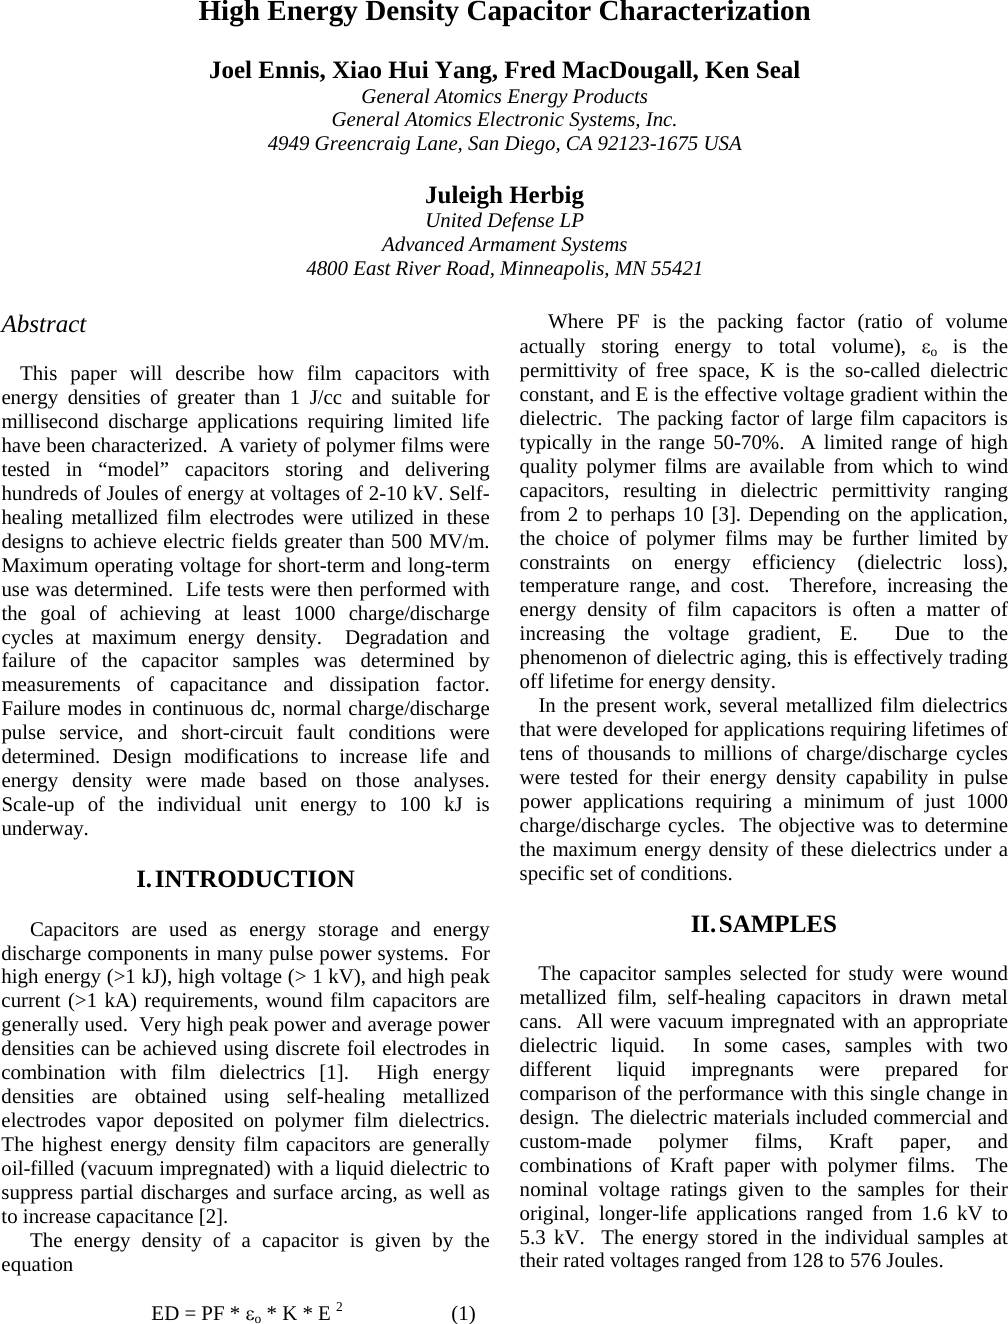 Page 2 of 5 - PREPARATION OF PAPERS FOR THE 2003 IEEE INTERNATIONAL CONFERENCE ON High-energy-capacitor-characterization